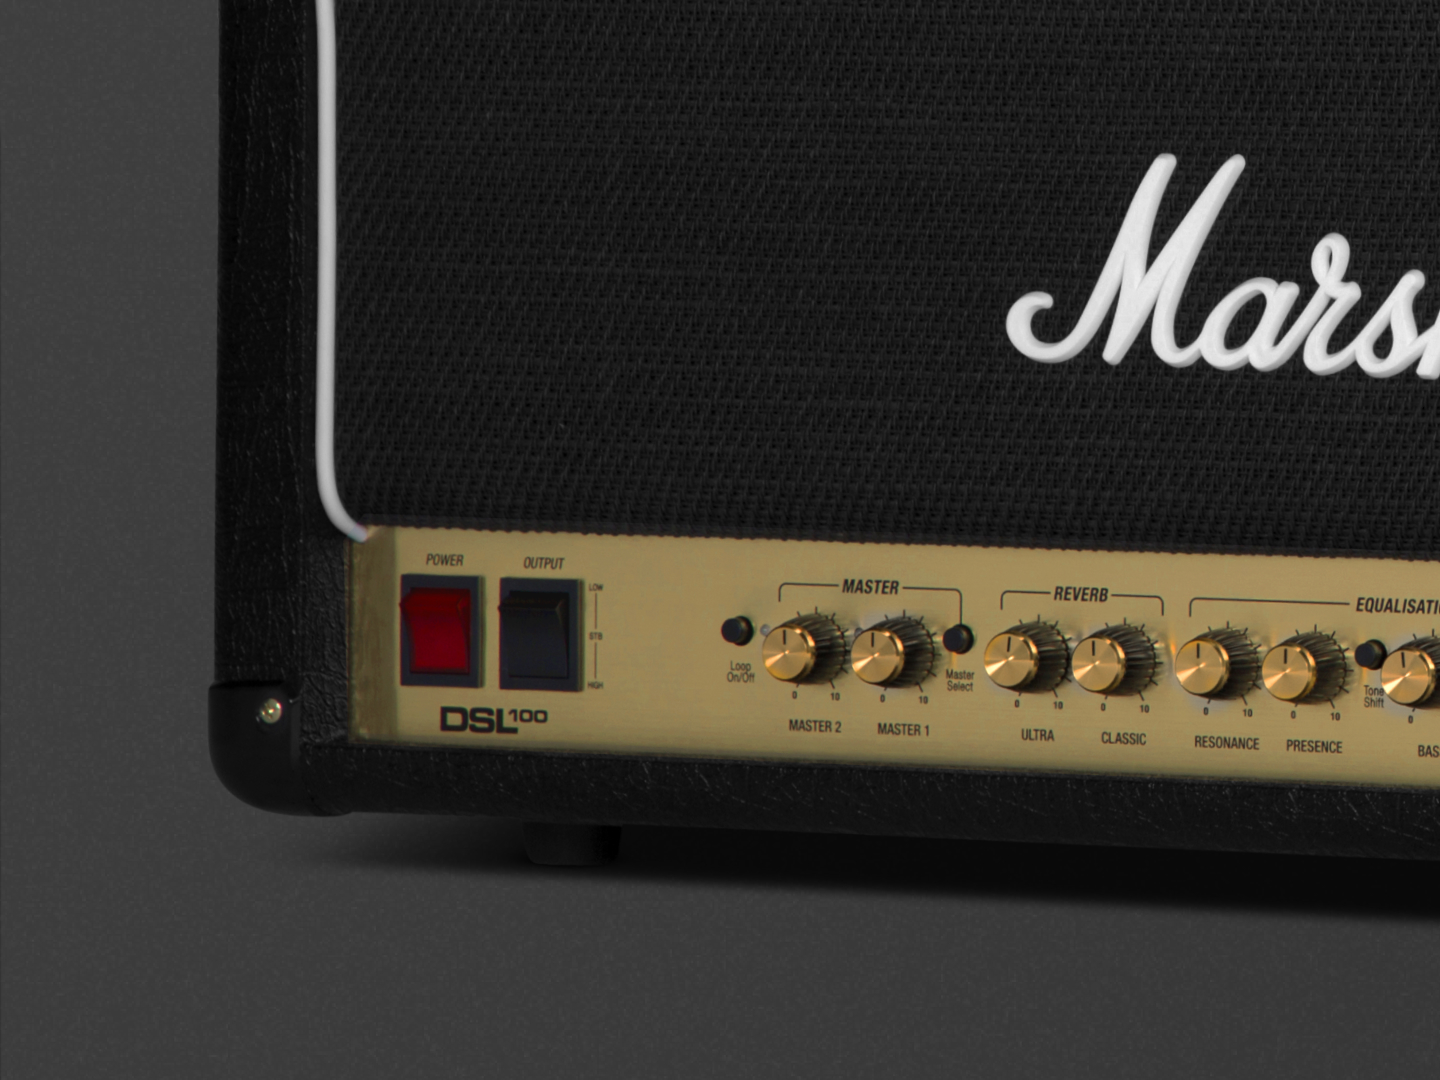 DSL100 Amp head with the ability to play anywhere | Marshall.com